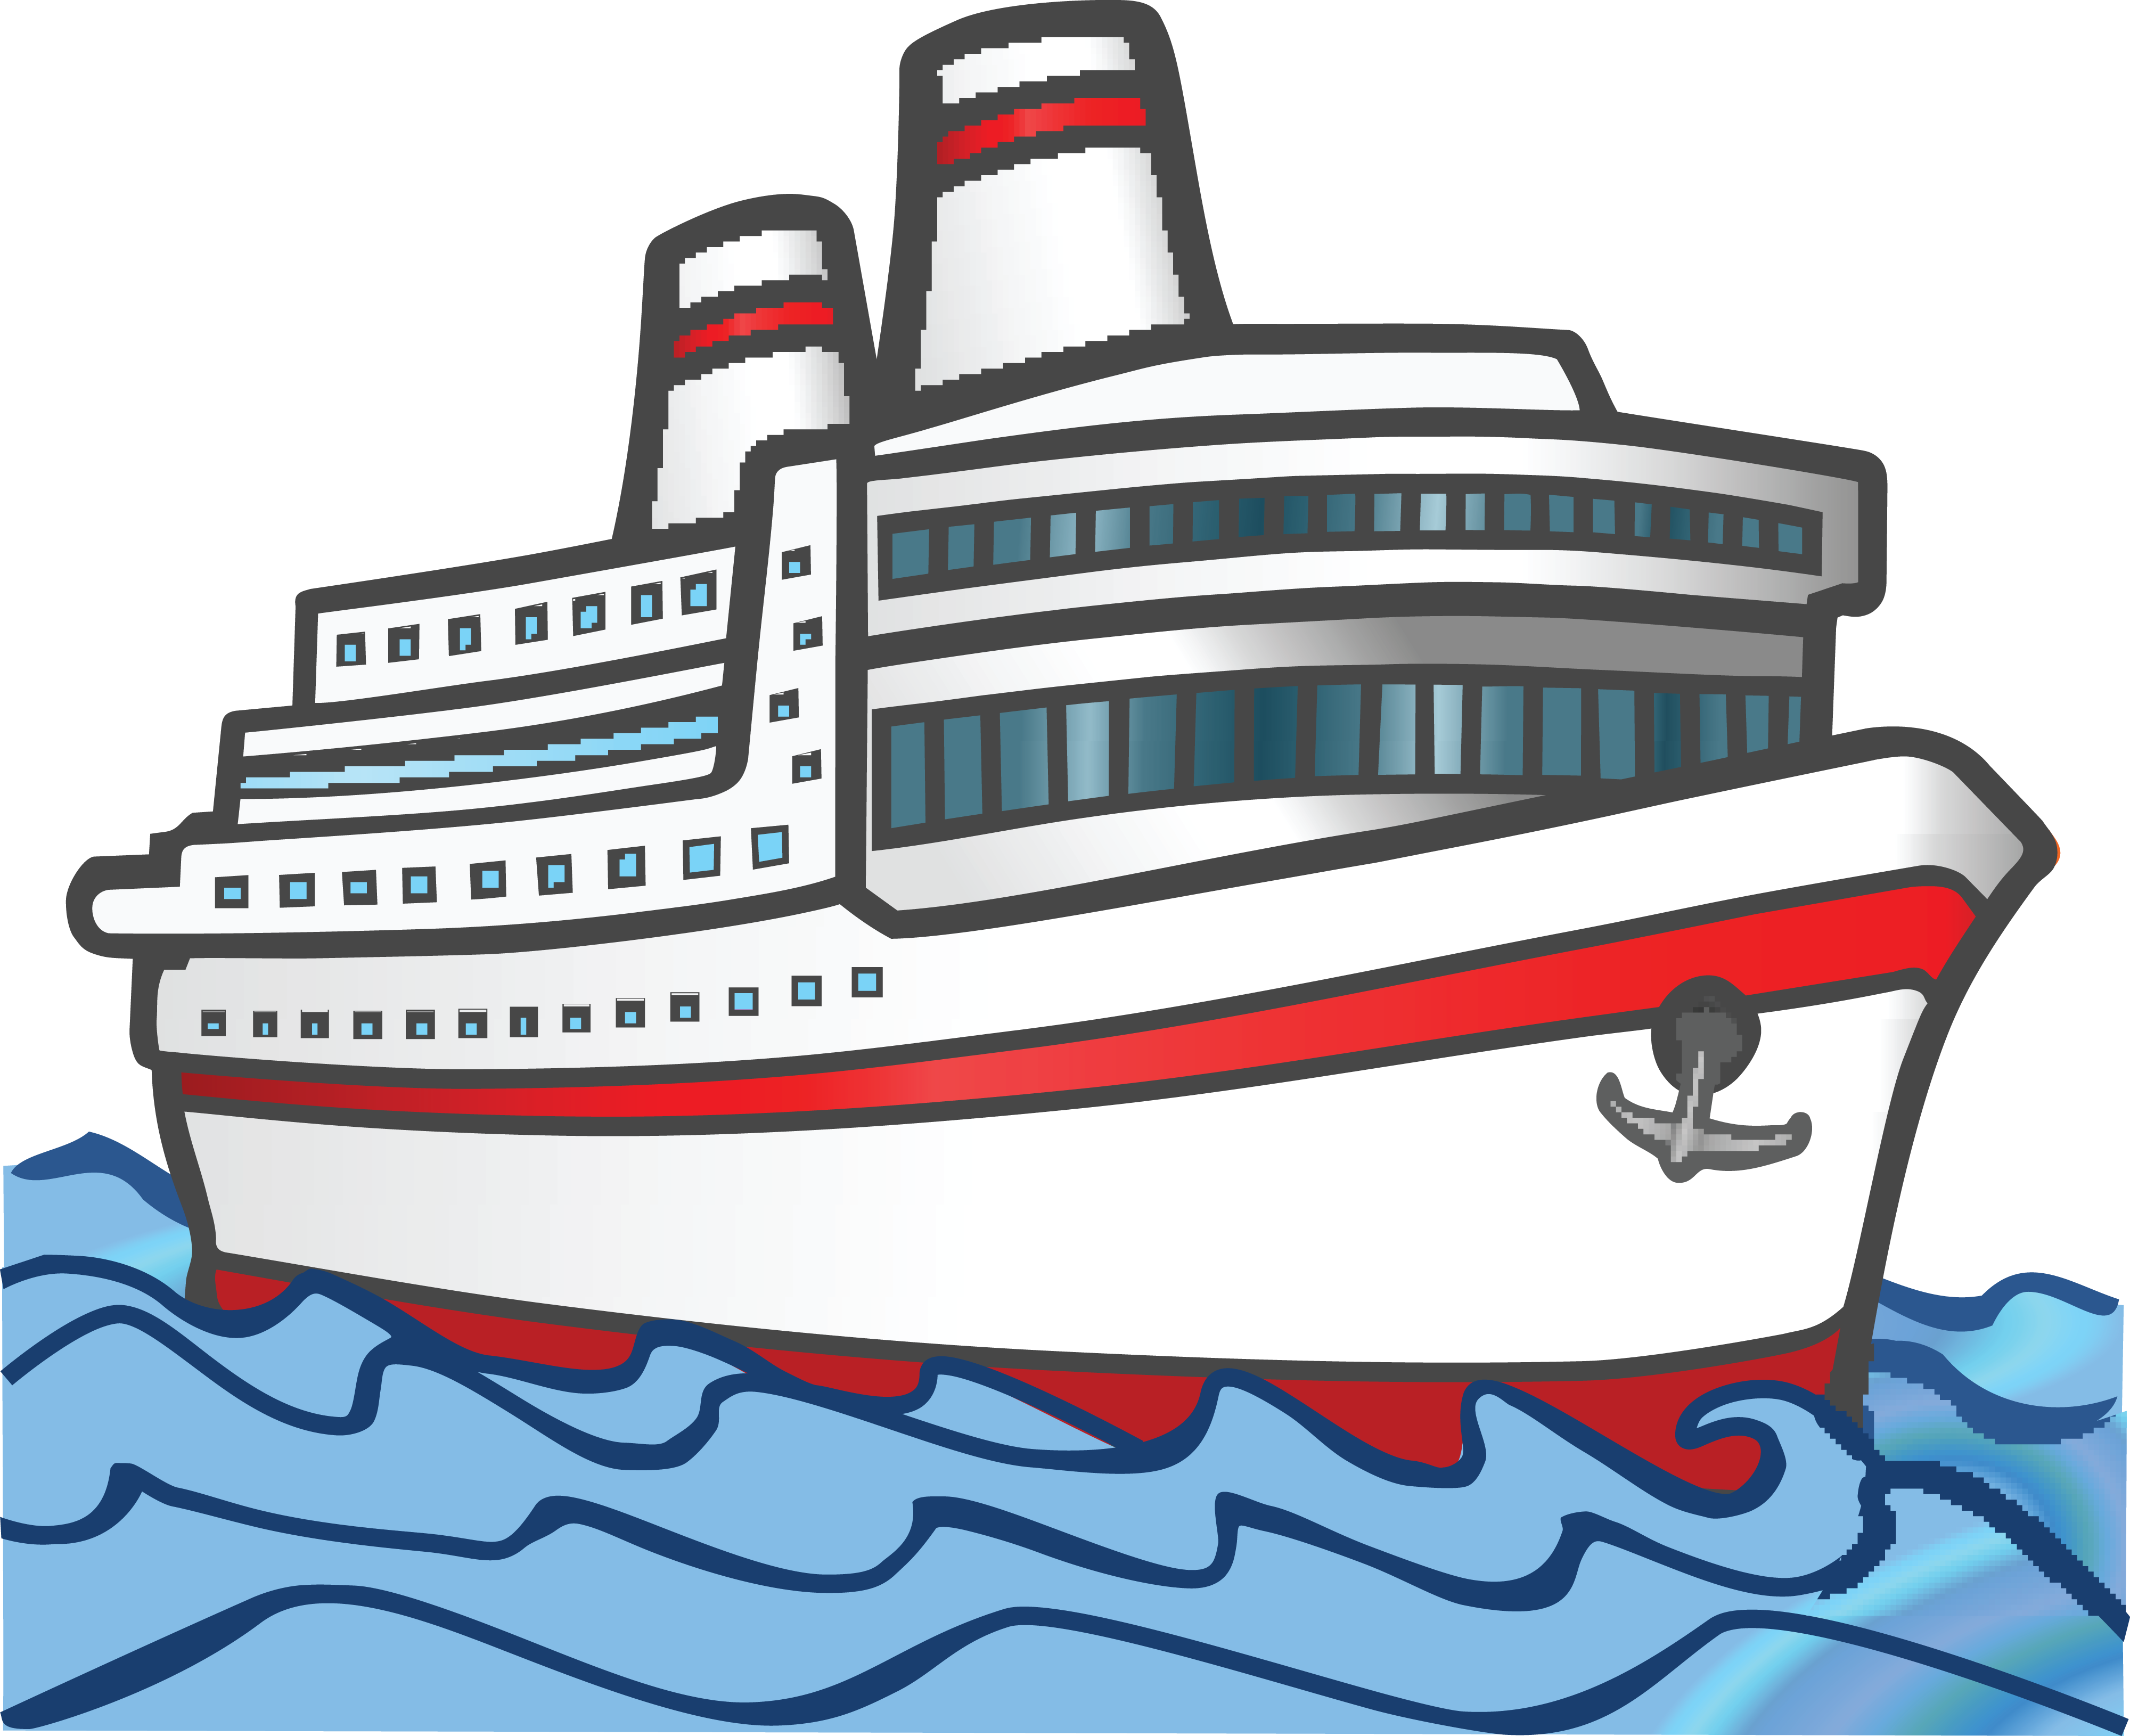 1197 Free Clipart Of A Cruise Boat 